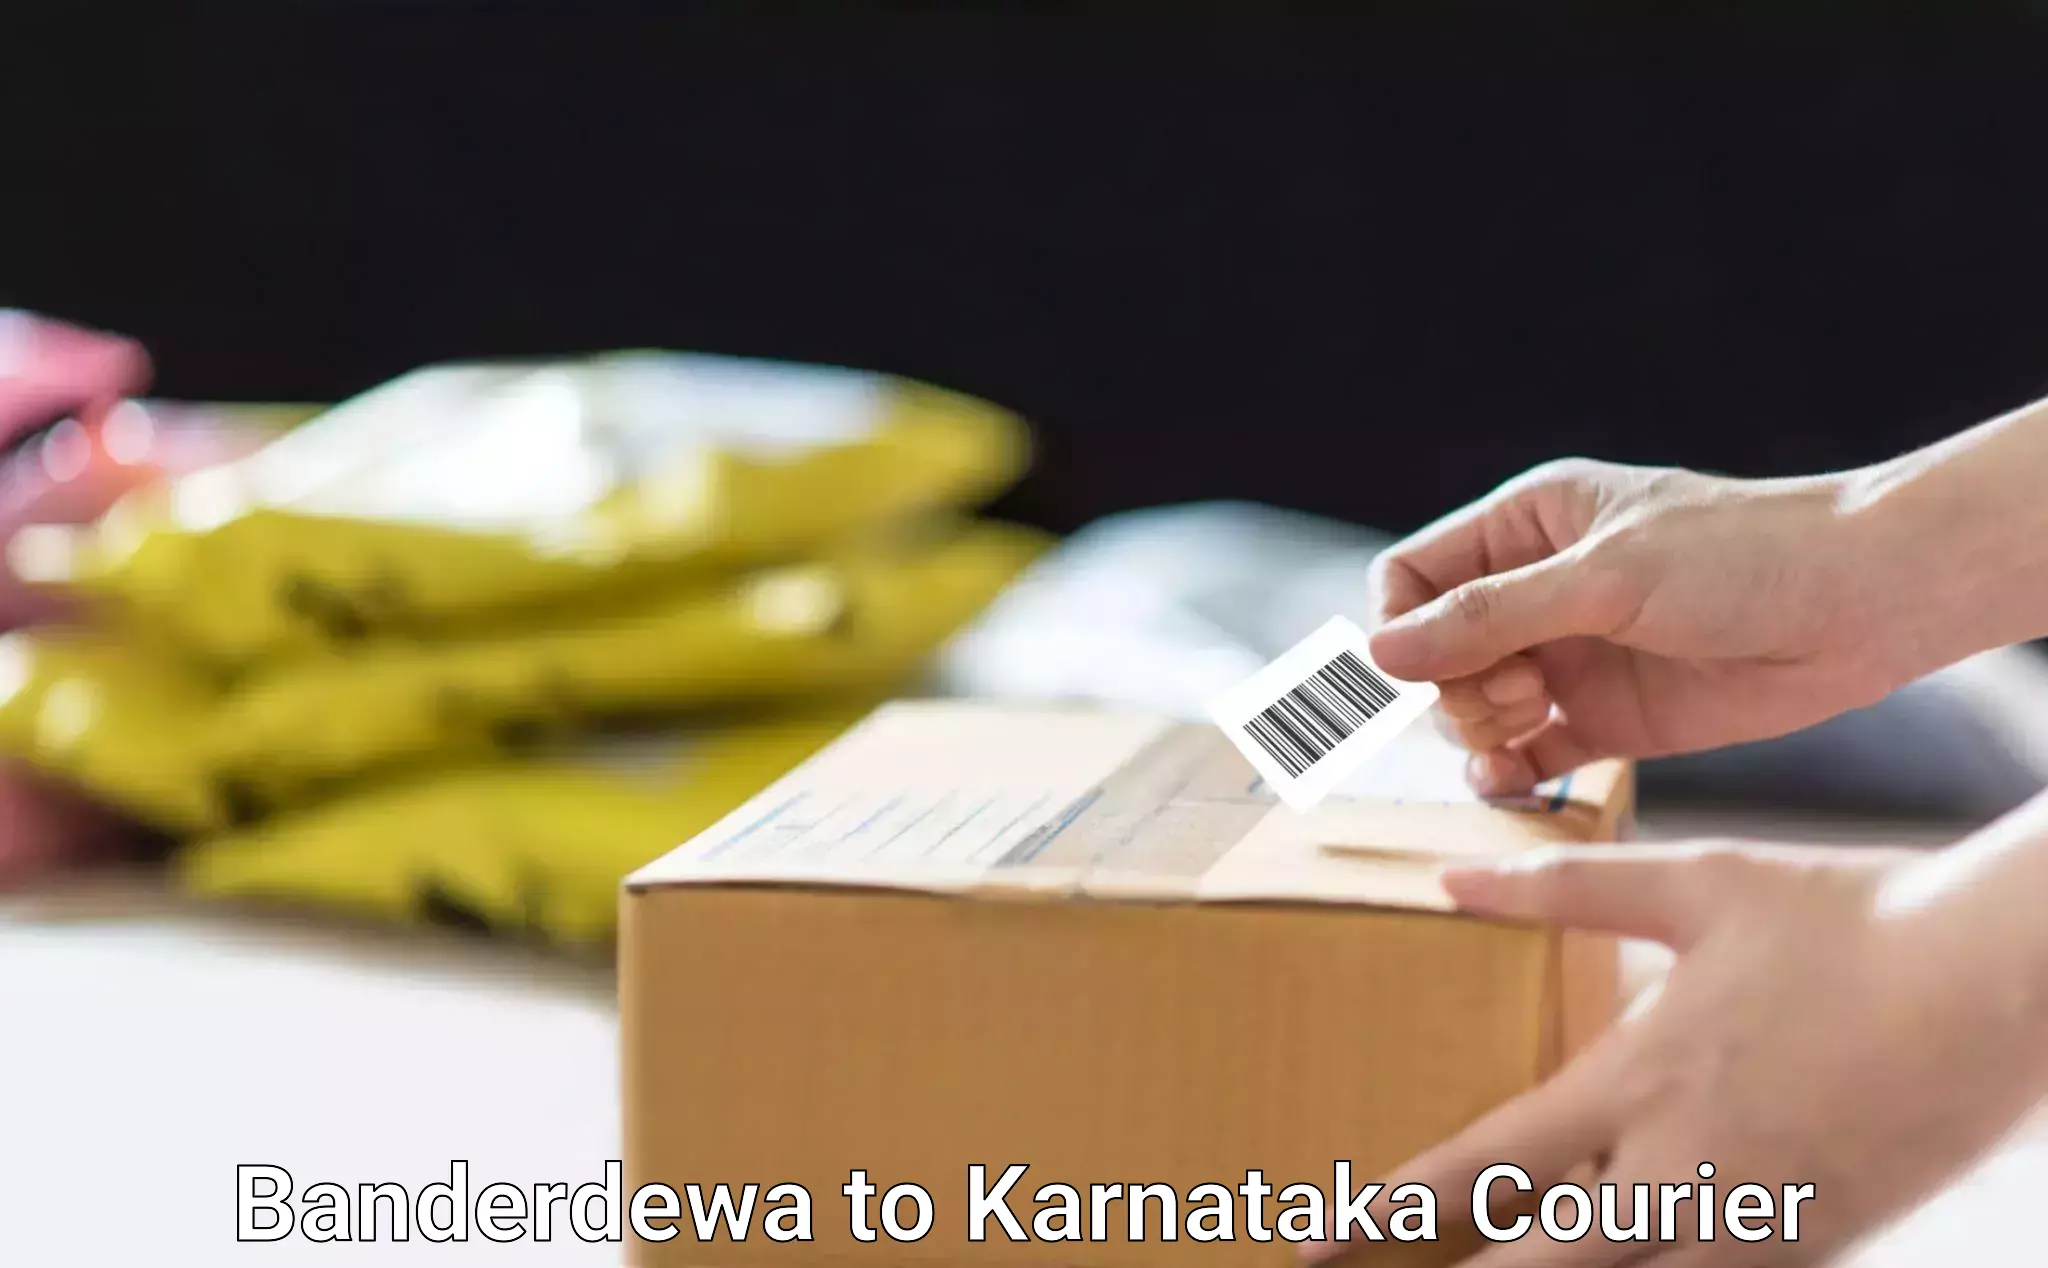 Multi-national courier services Banderdewa to Koppa